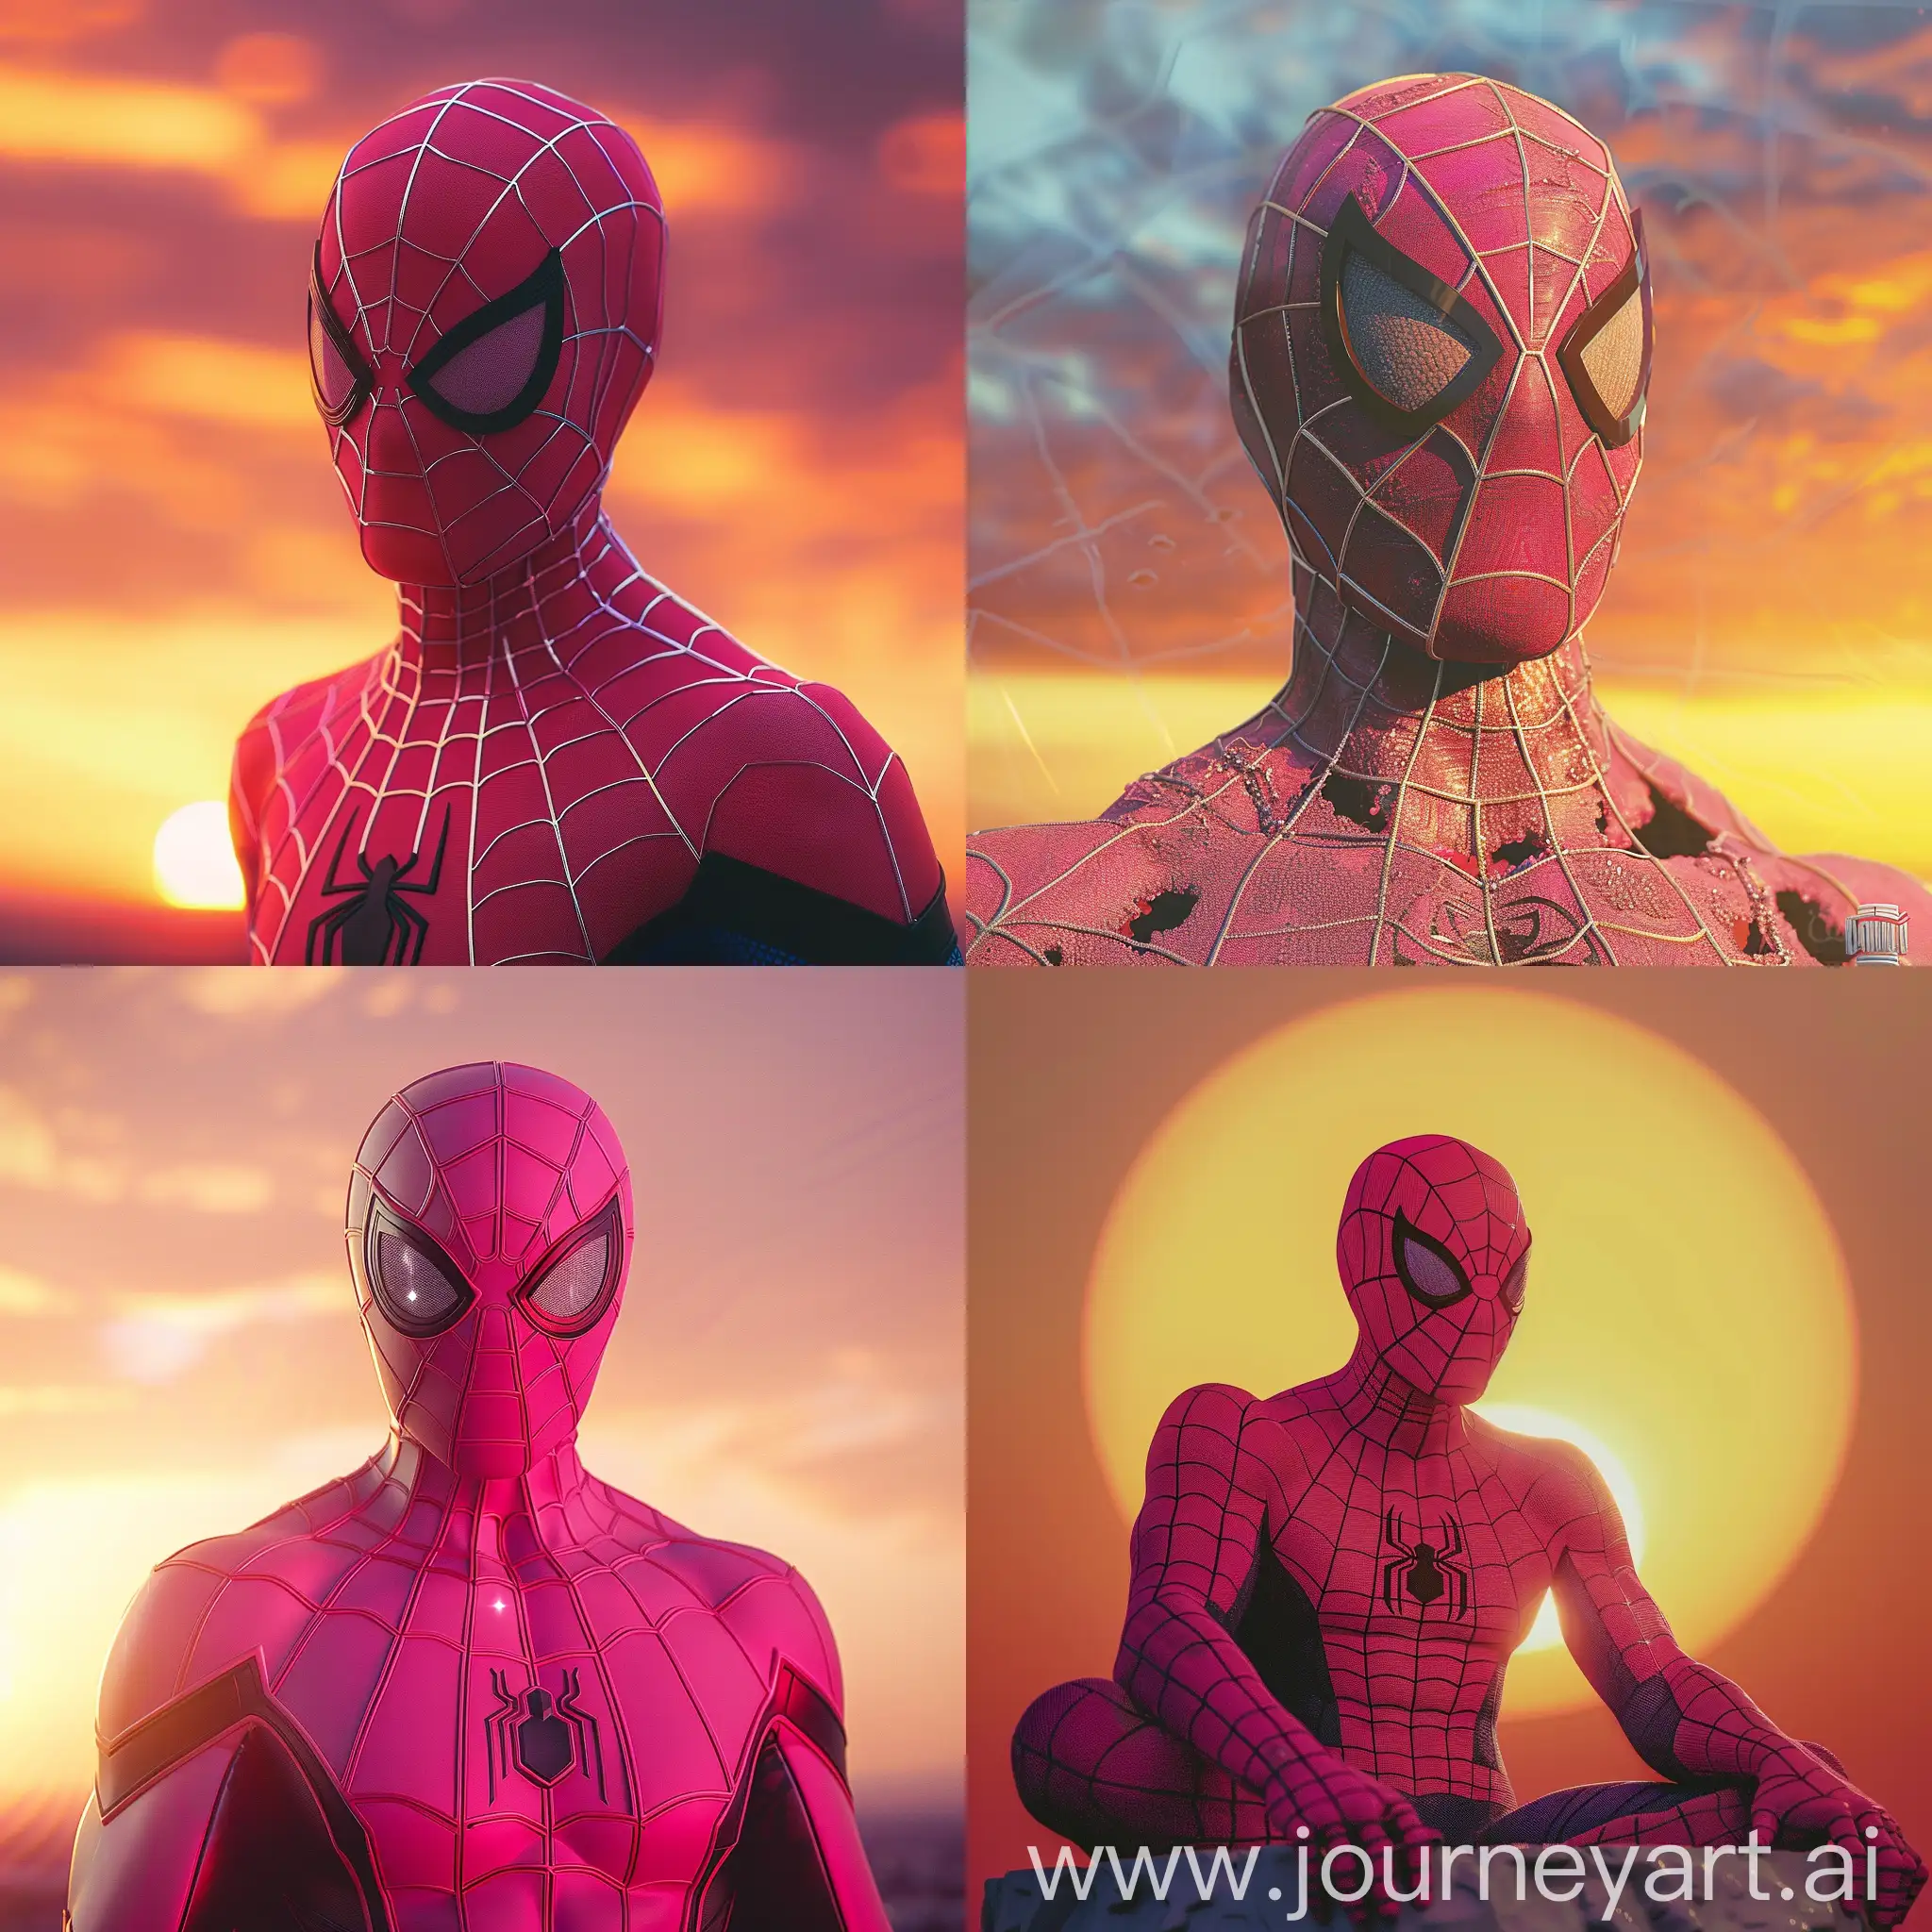 Pink-Spiderman-Silhouetted-against-Sunset-Sky